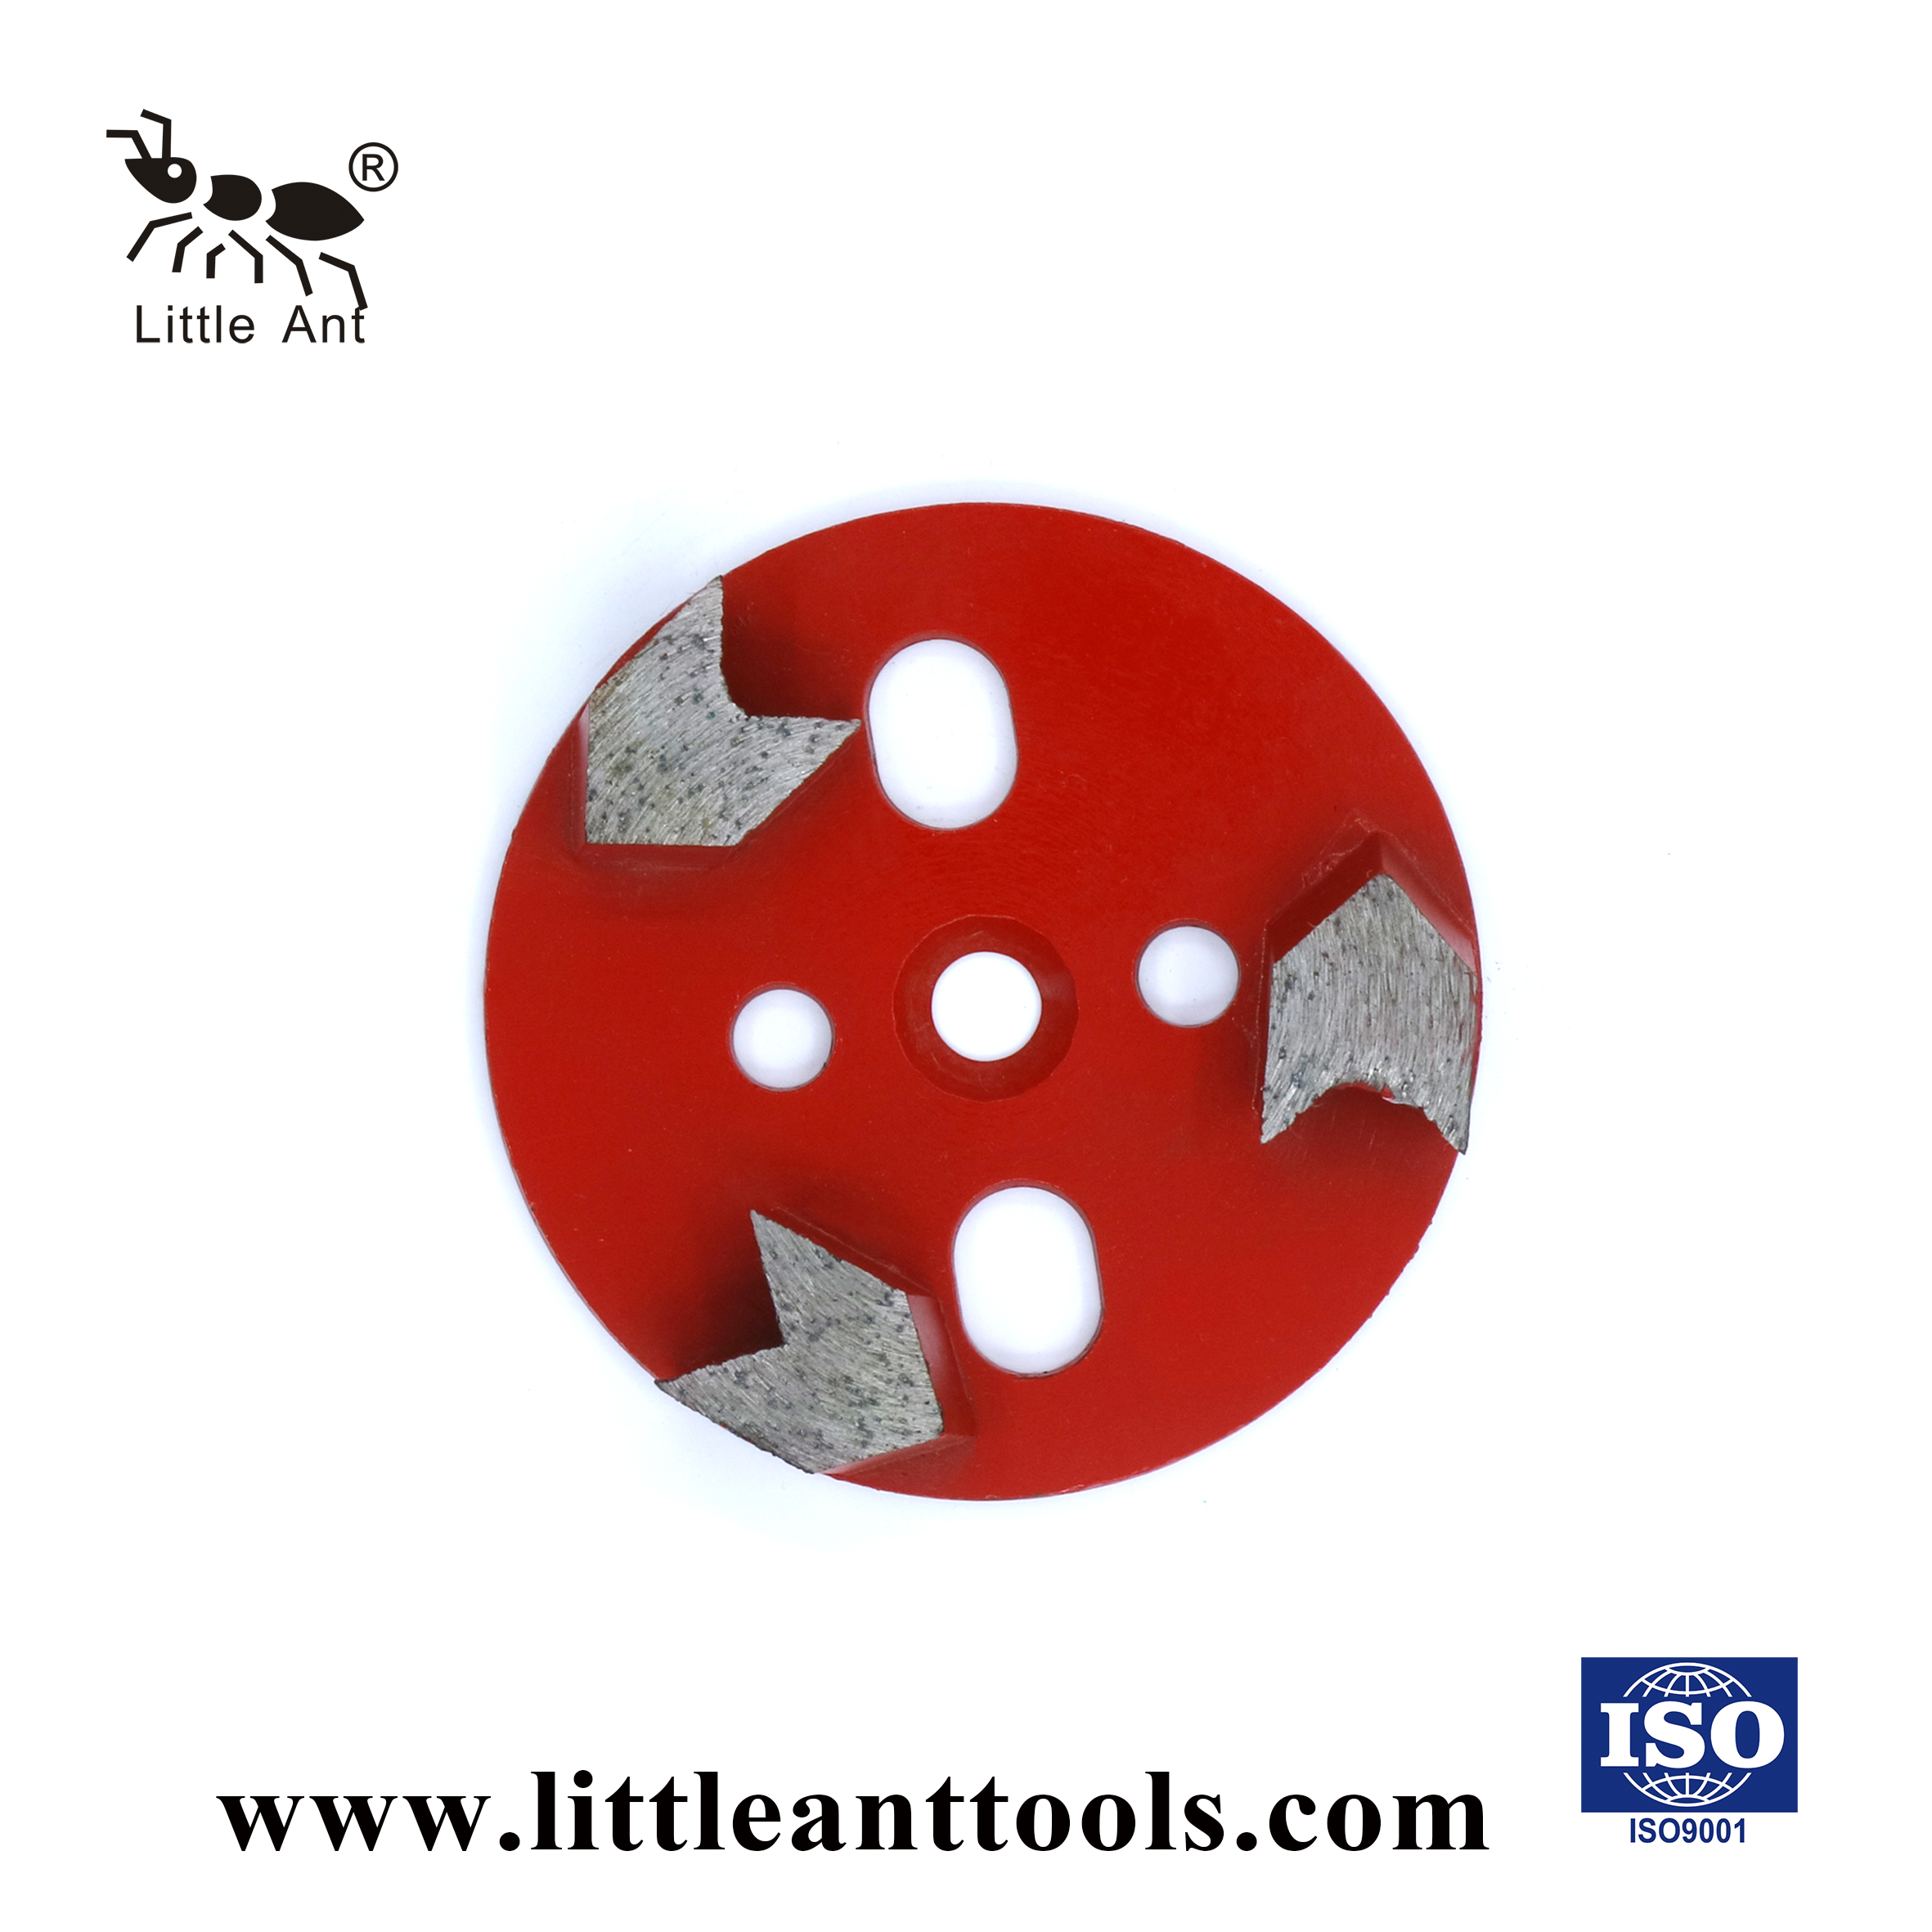 LITTLE ANT 4-inch Circular Grinding Plate Metal Disc Tool for Concrete Dry And Wet Use 3 Arrow Type Sgements 100mm